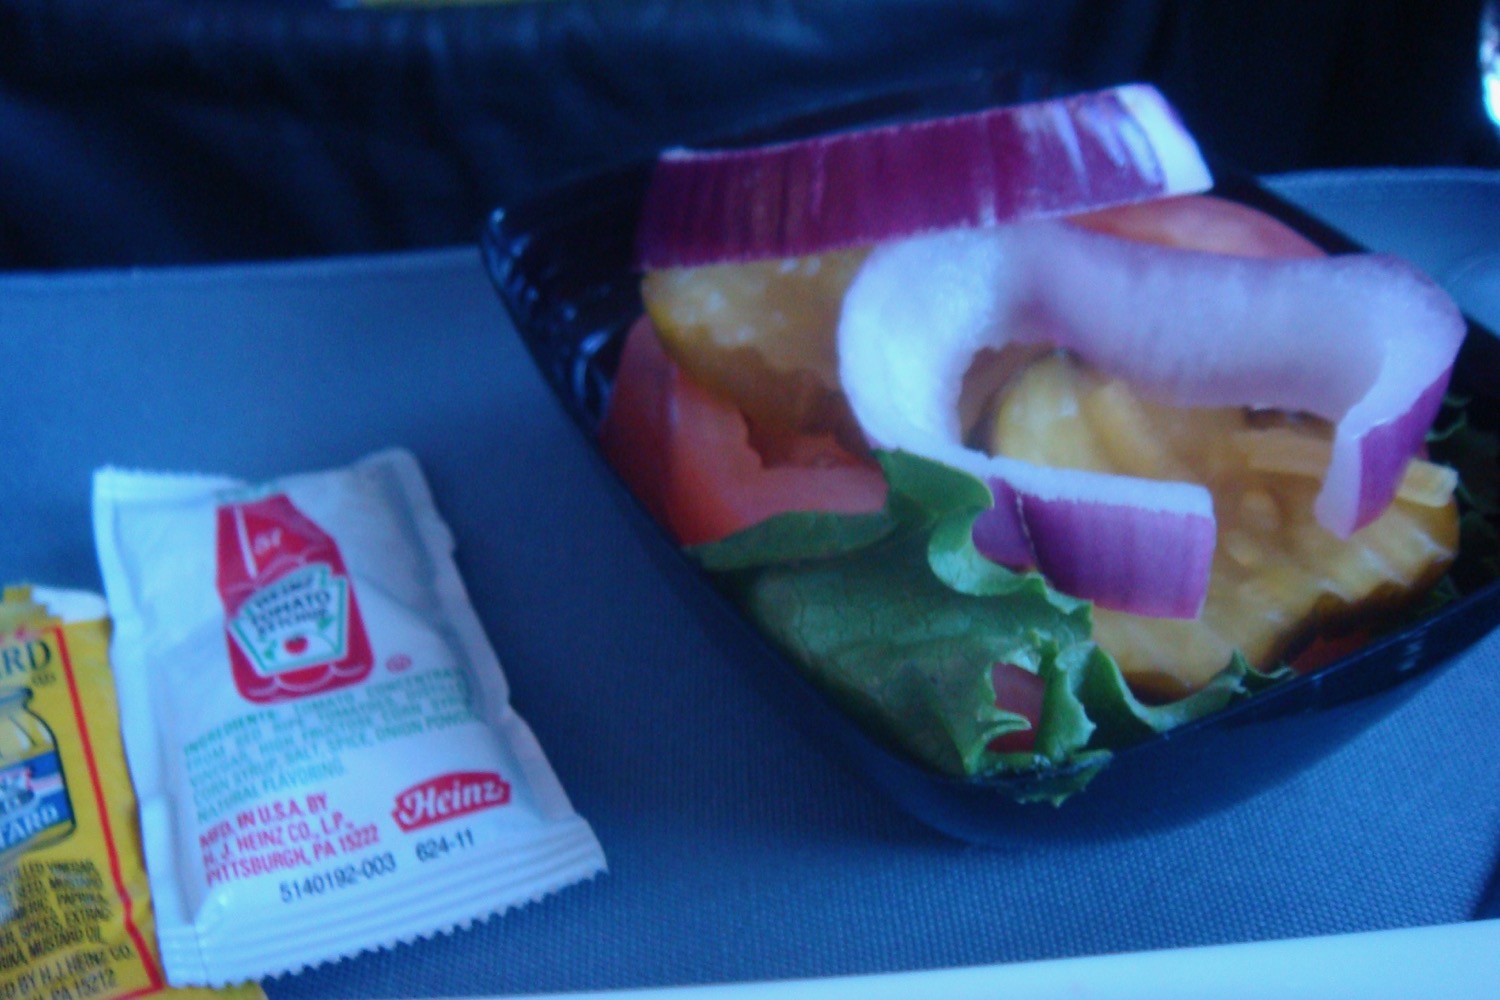 United Airlines Cheesburger - 2